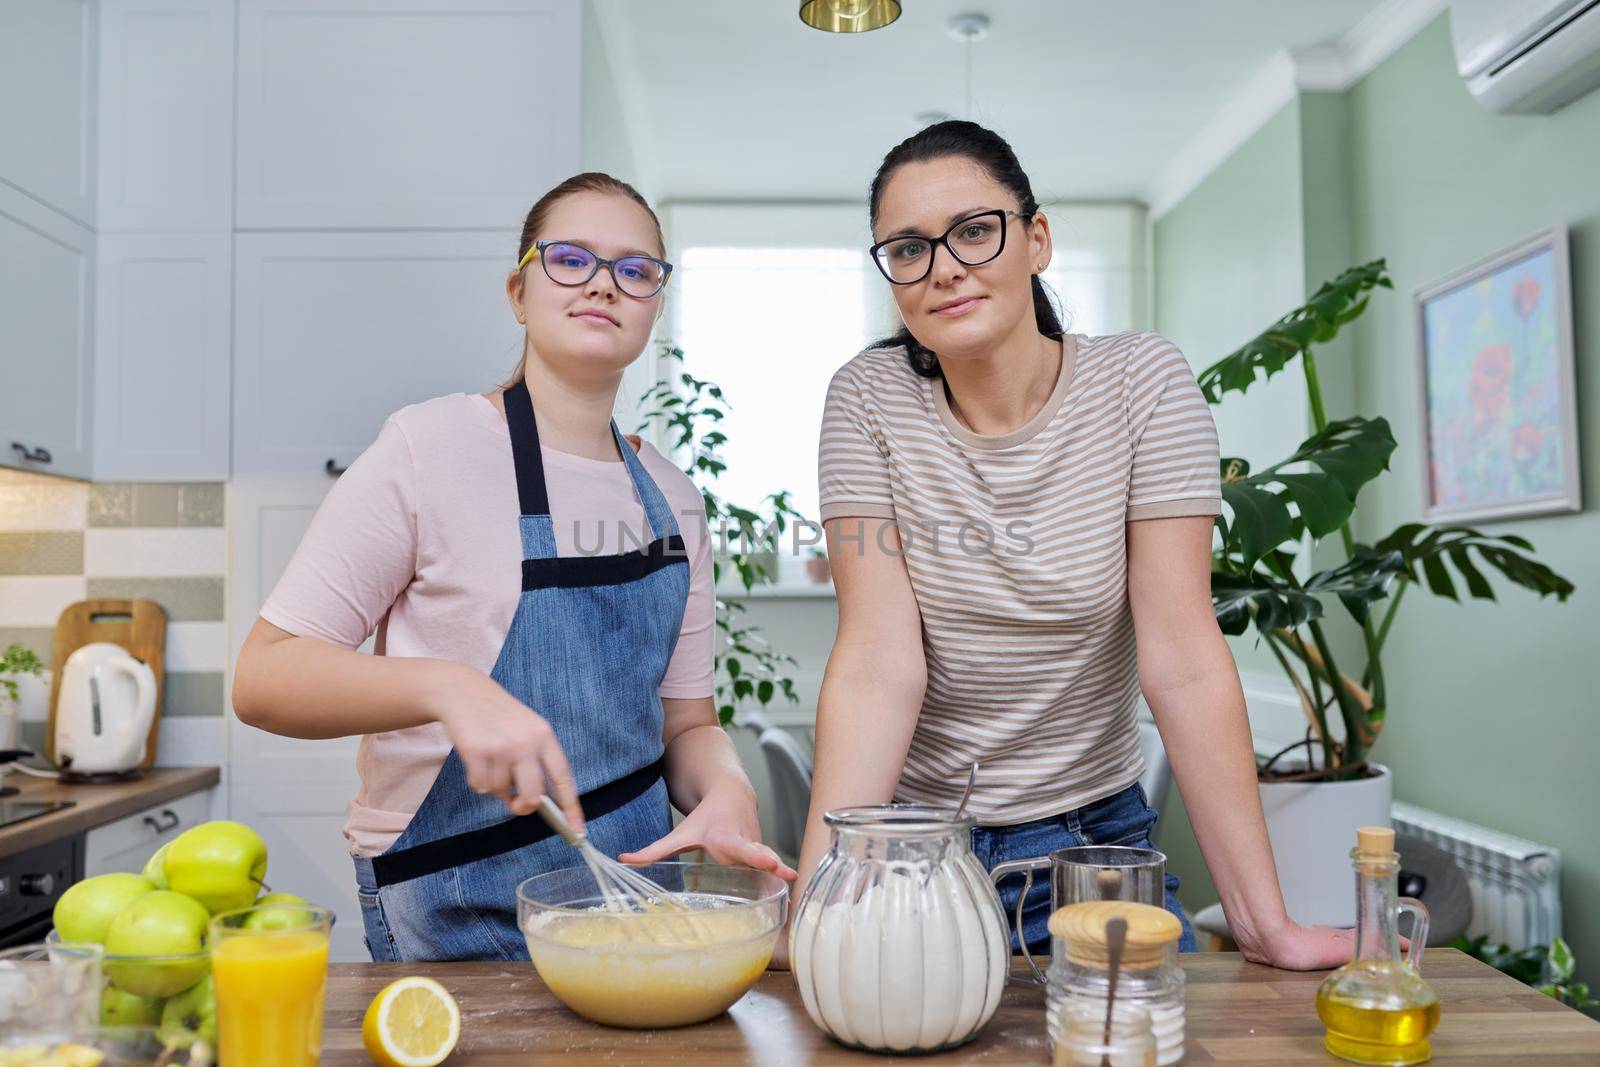 Mom and daughter 12, 13 years old cook together apple pie, mother teaches girl cooking, parent-teen communication, lifestyle, eat at home concept